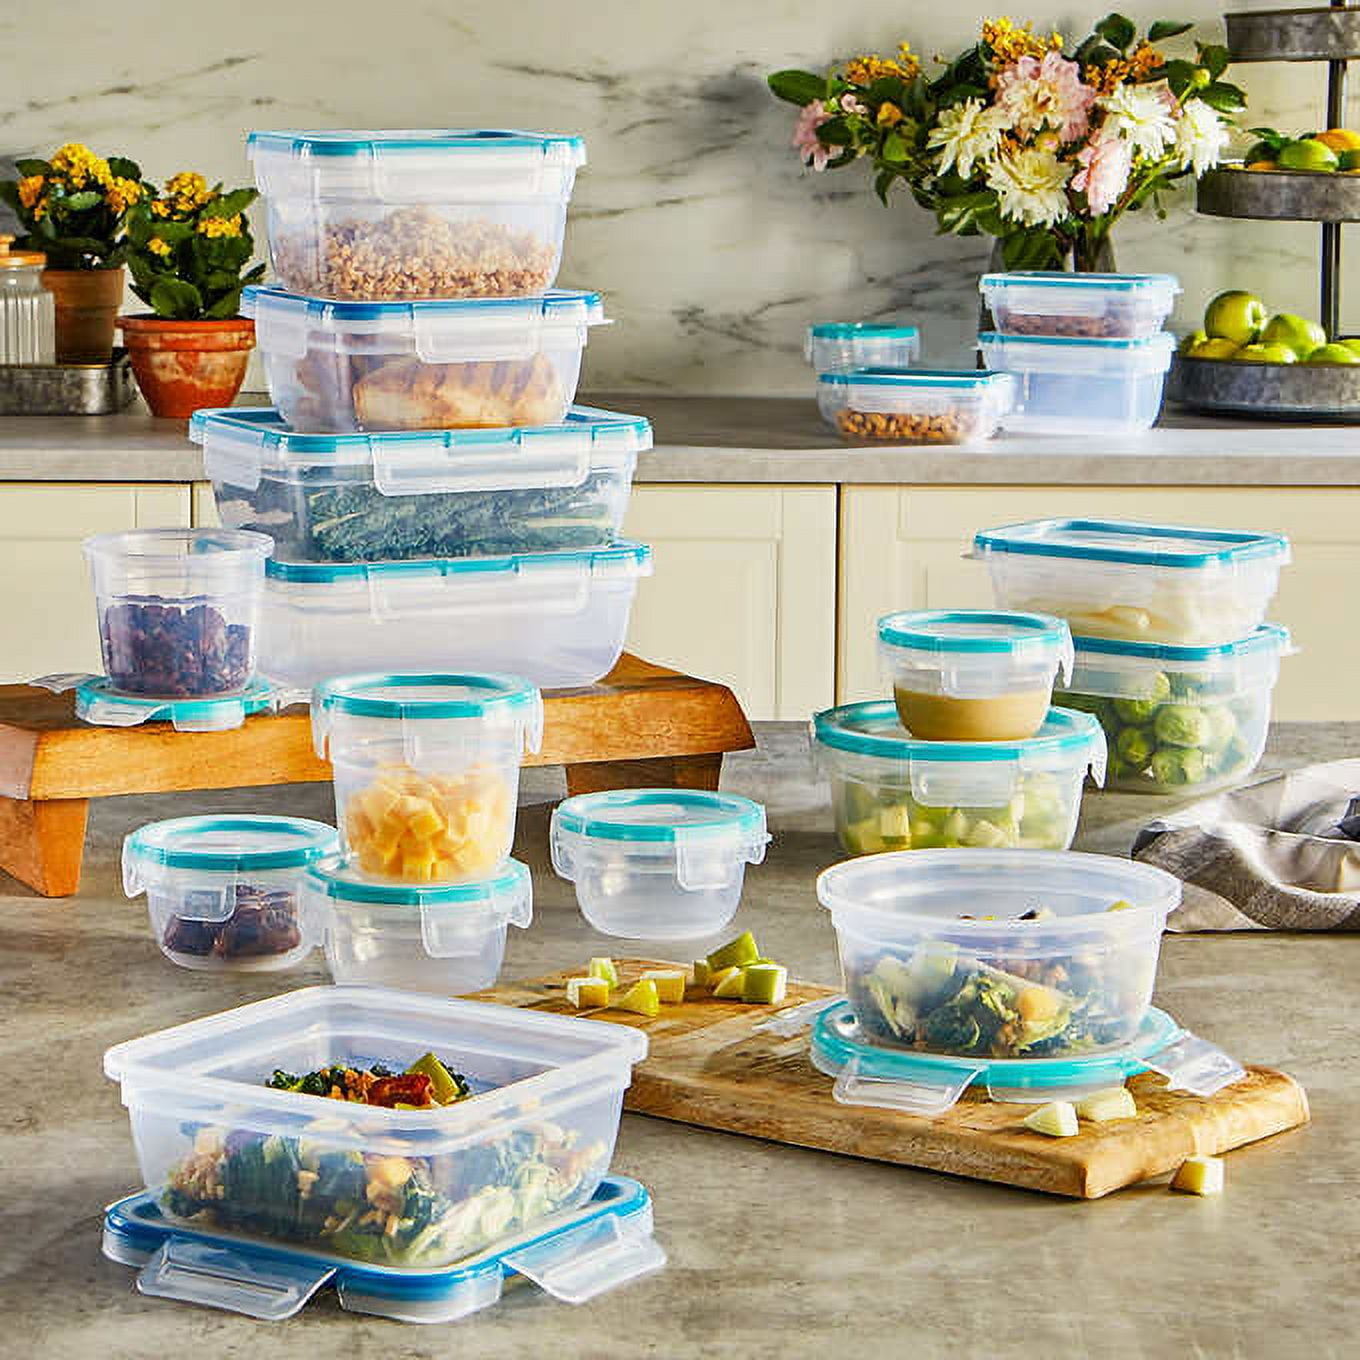 Snapware 38-Piece Set Just $15.99 at Costco + More Pantry Storage Deals